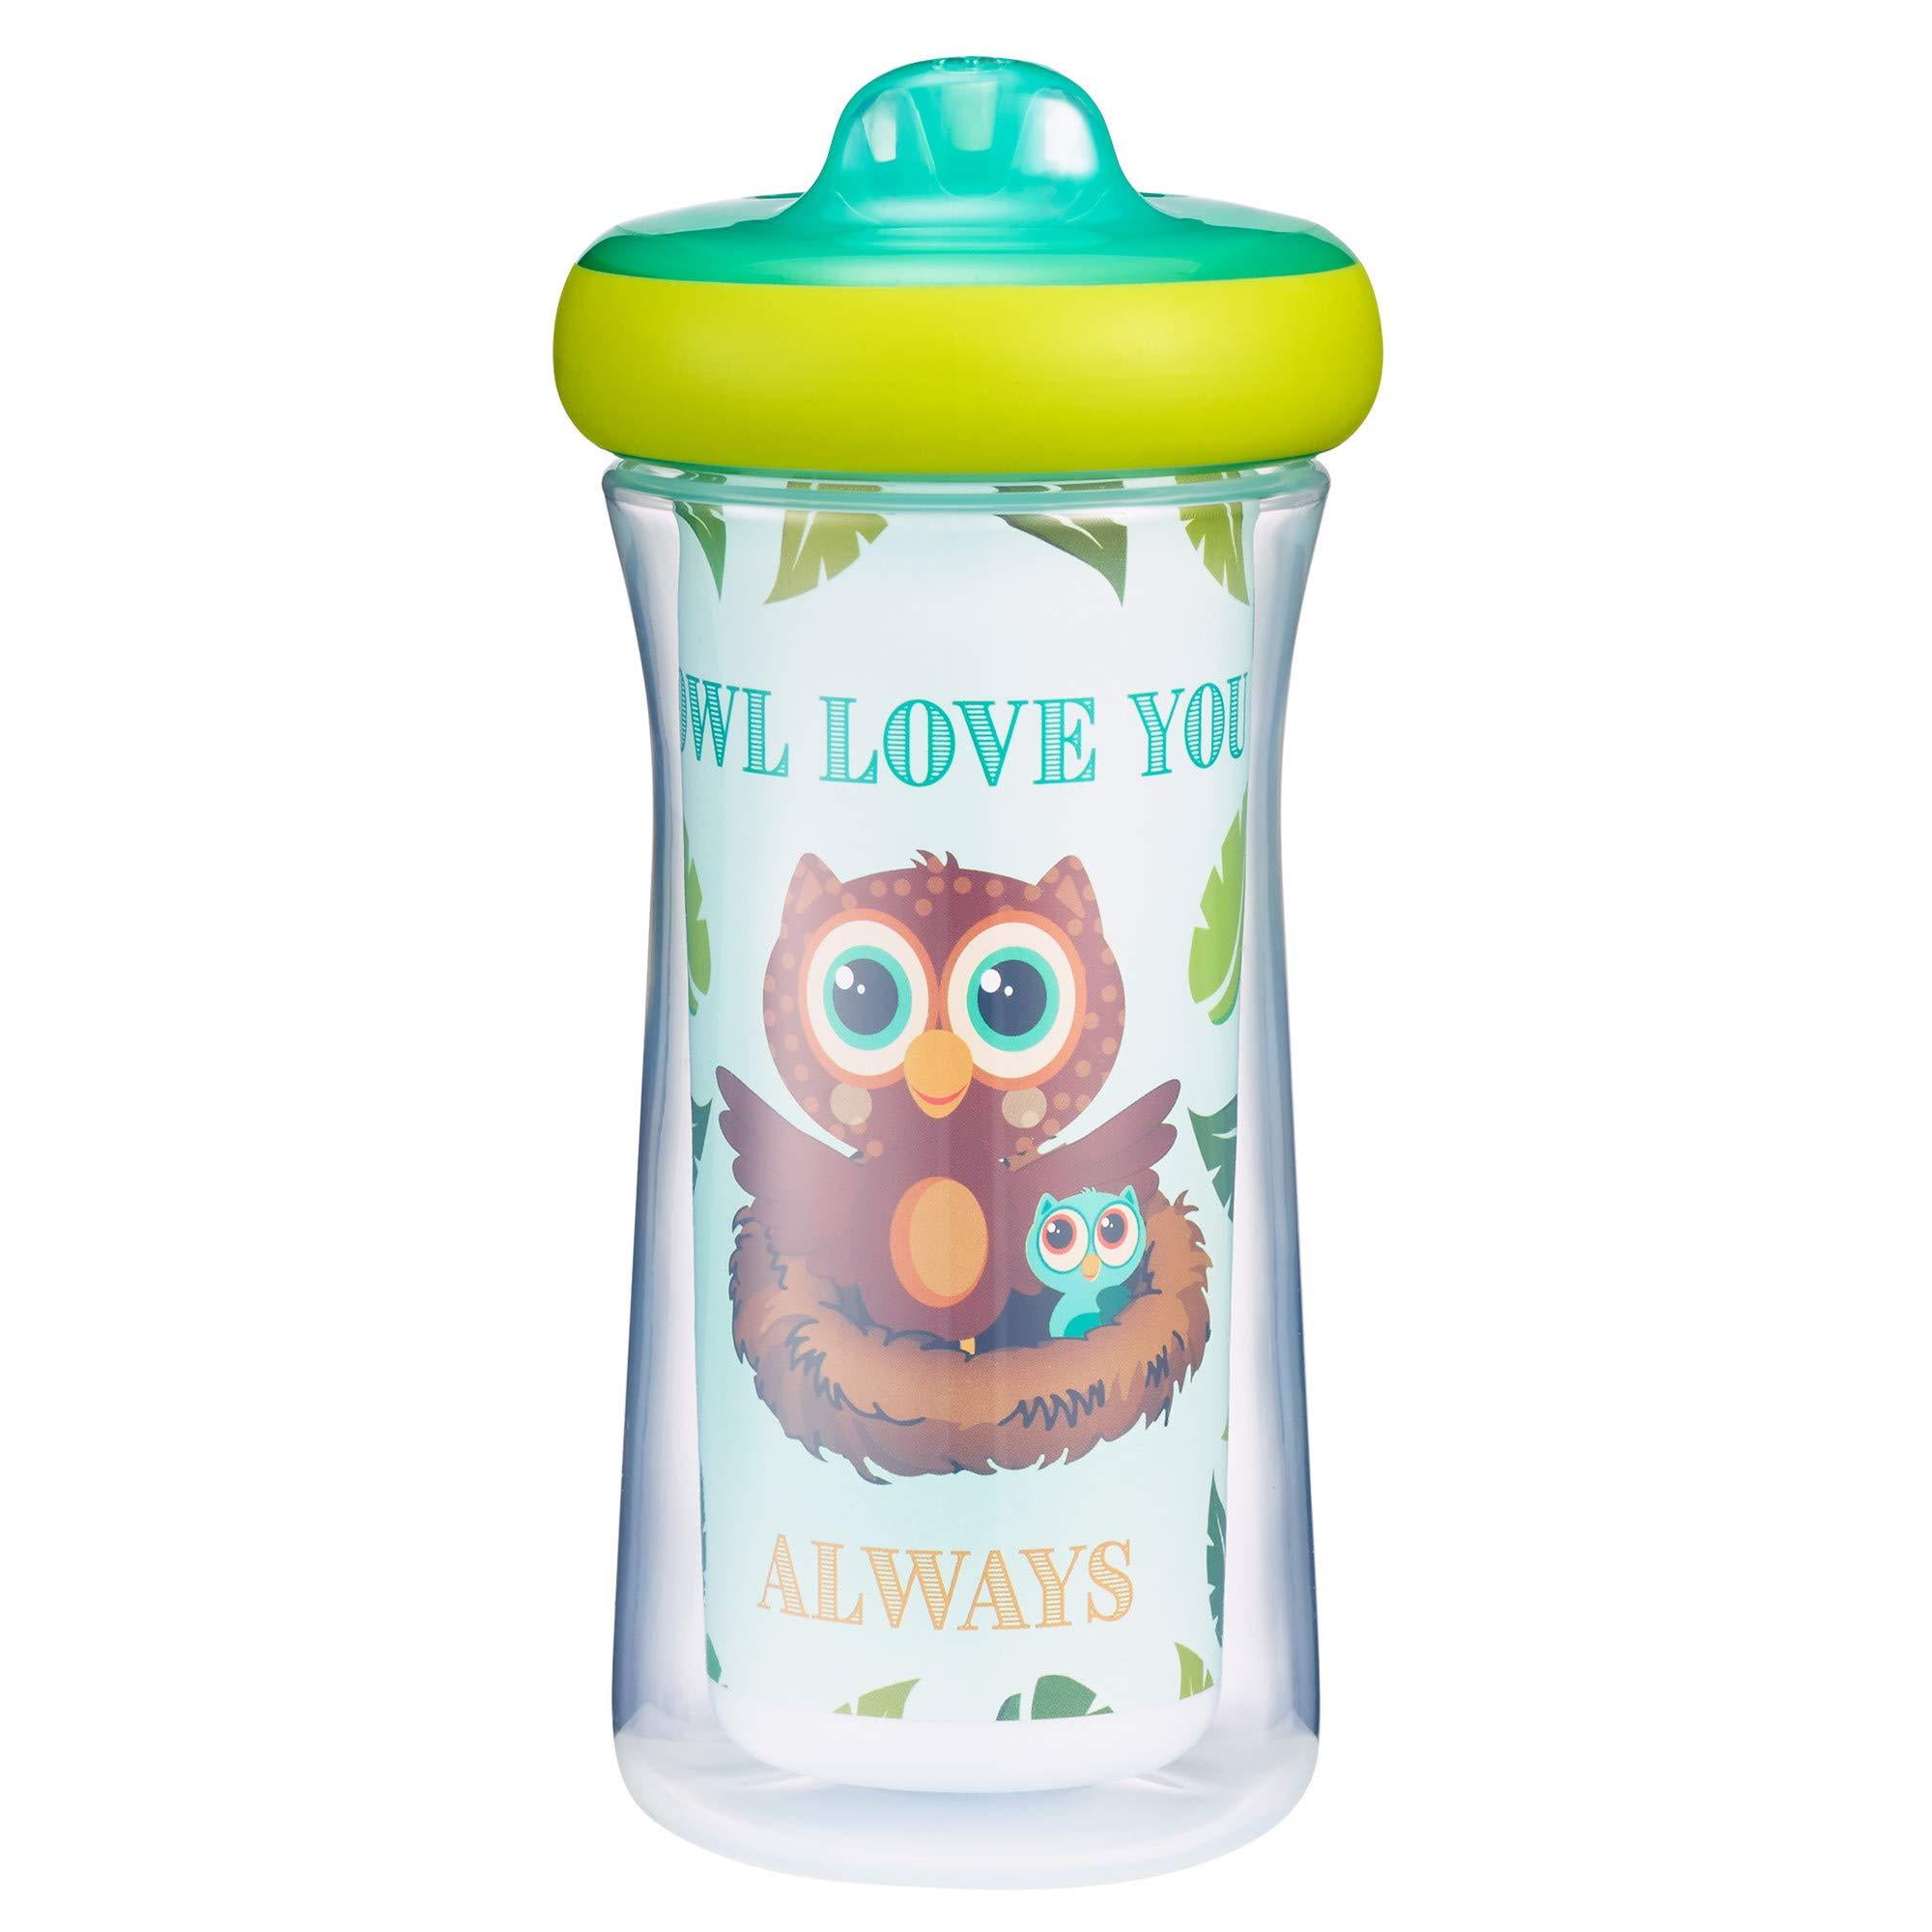  The First Years Dinosaur Kids Insulated Sippy Cups -  Dishwasher Safe Spill Proof Toddler Cups - Ages 12 Months and Up - 9 Ounces  - 2 Count : Baby